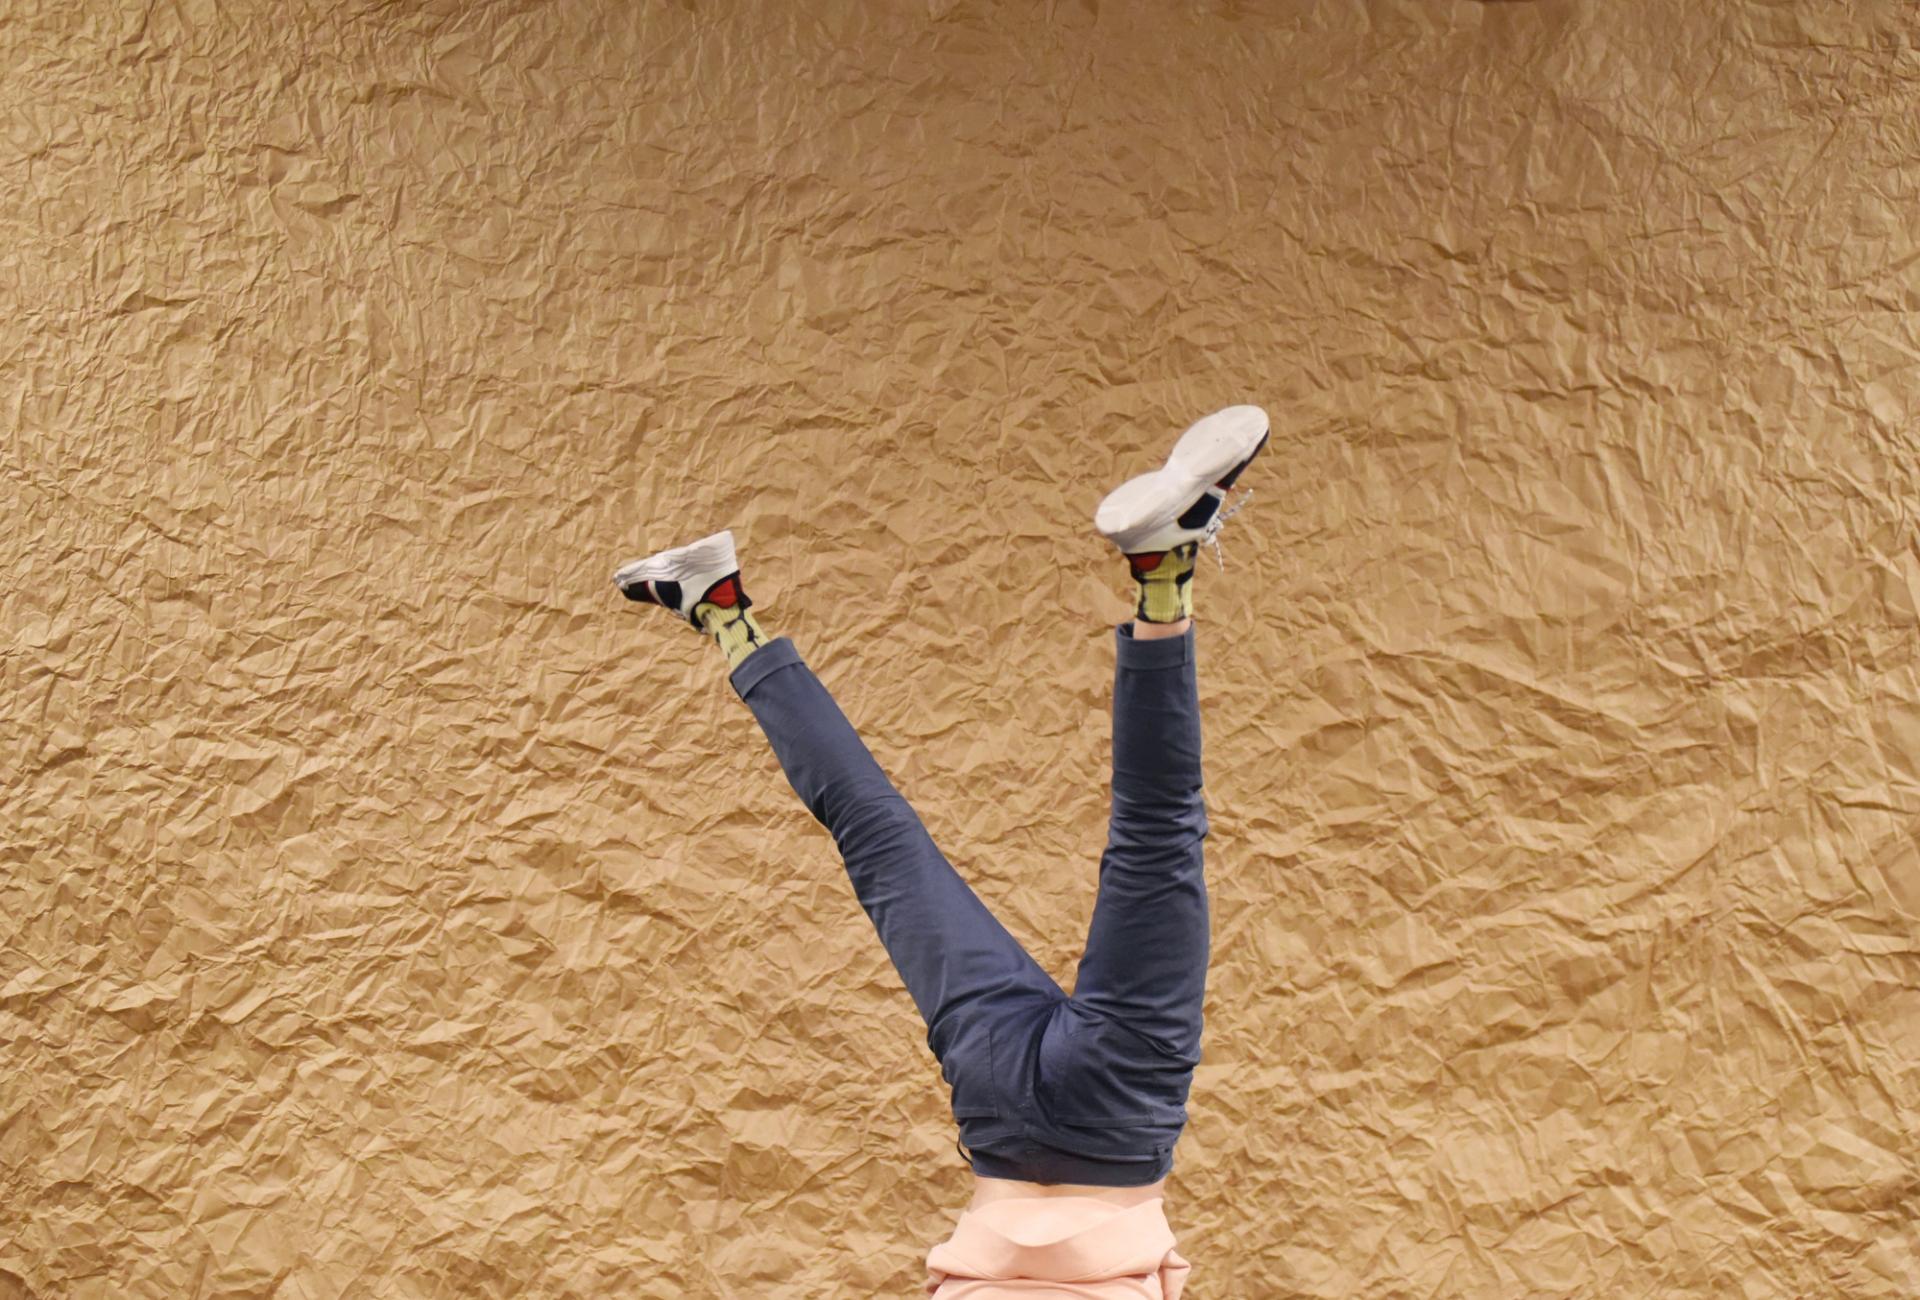 Pablo is doing a handstand, only his plue pants and sneakers visible in the frame, against a brown wrinkled paper backdrop. 